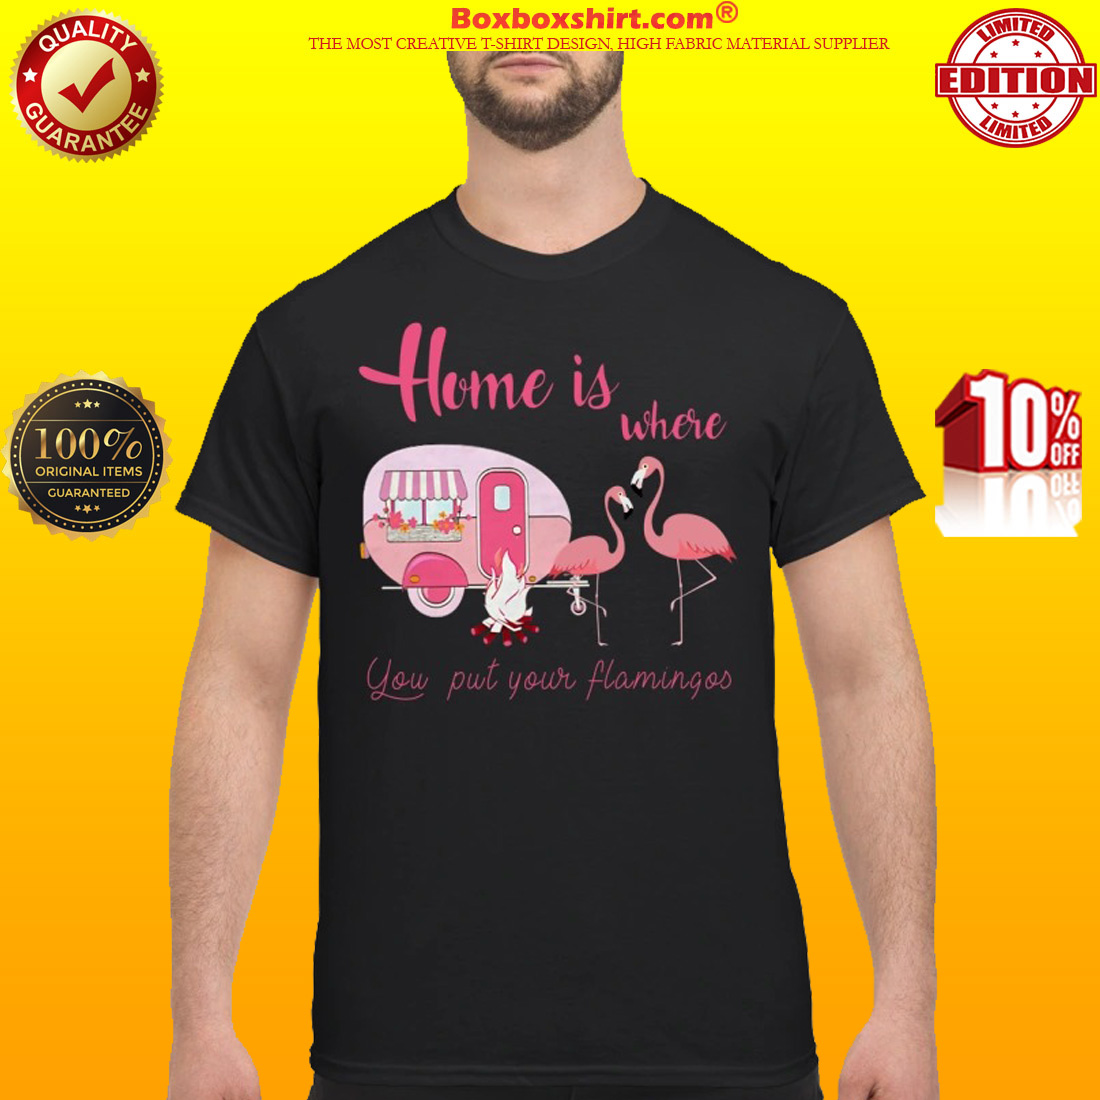 Home is where you put your flamingos classic shirt